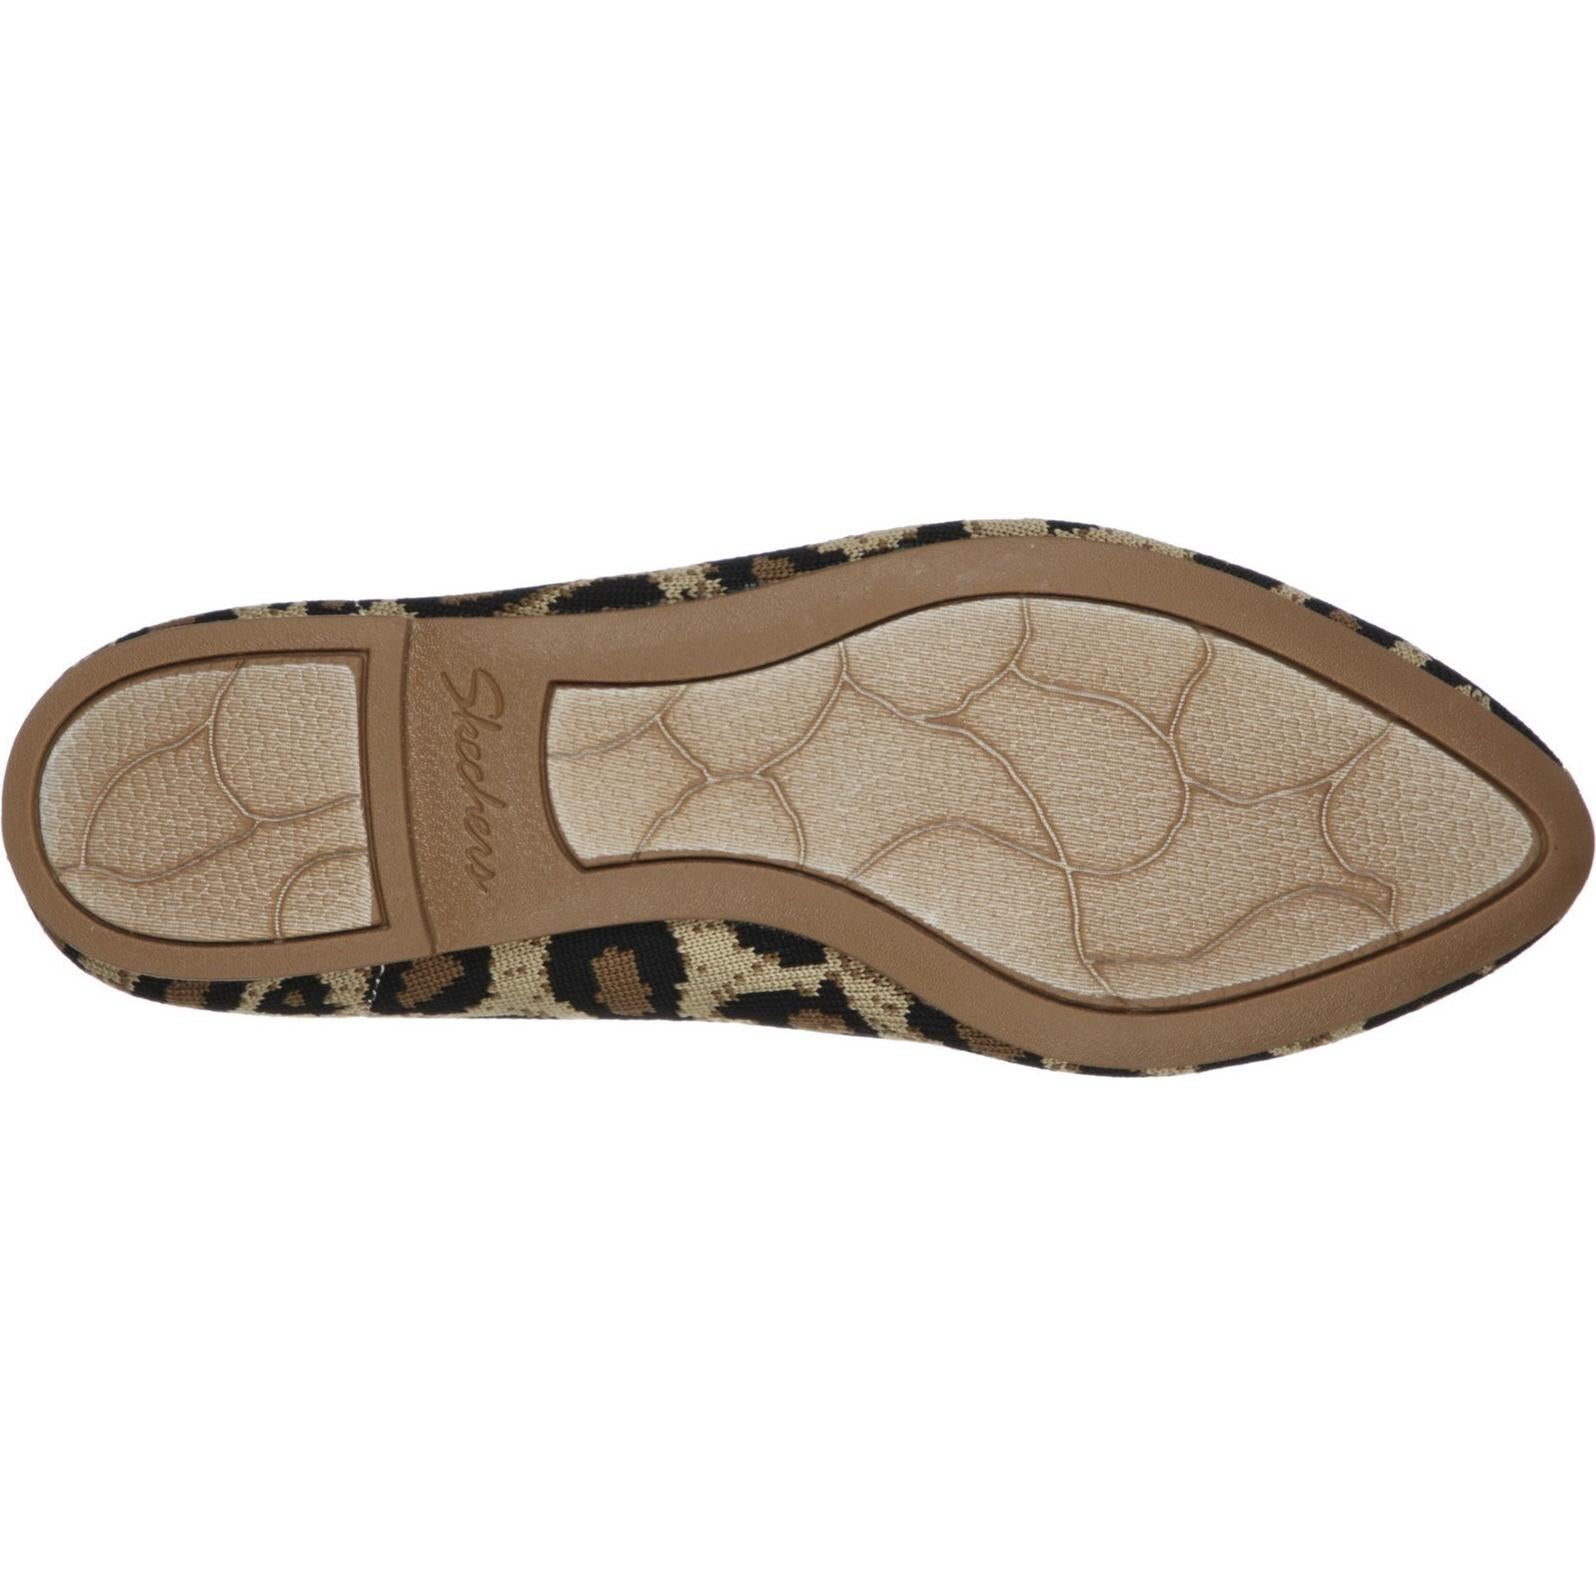 Skechers Cleo Claw-Some Slip On Canvas Shoes